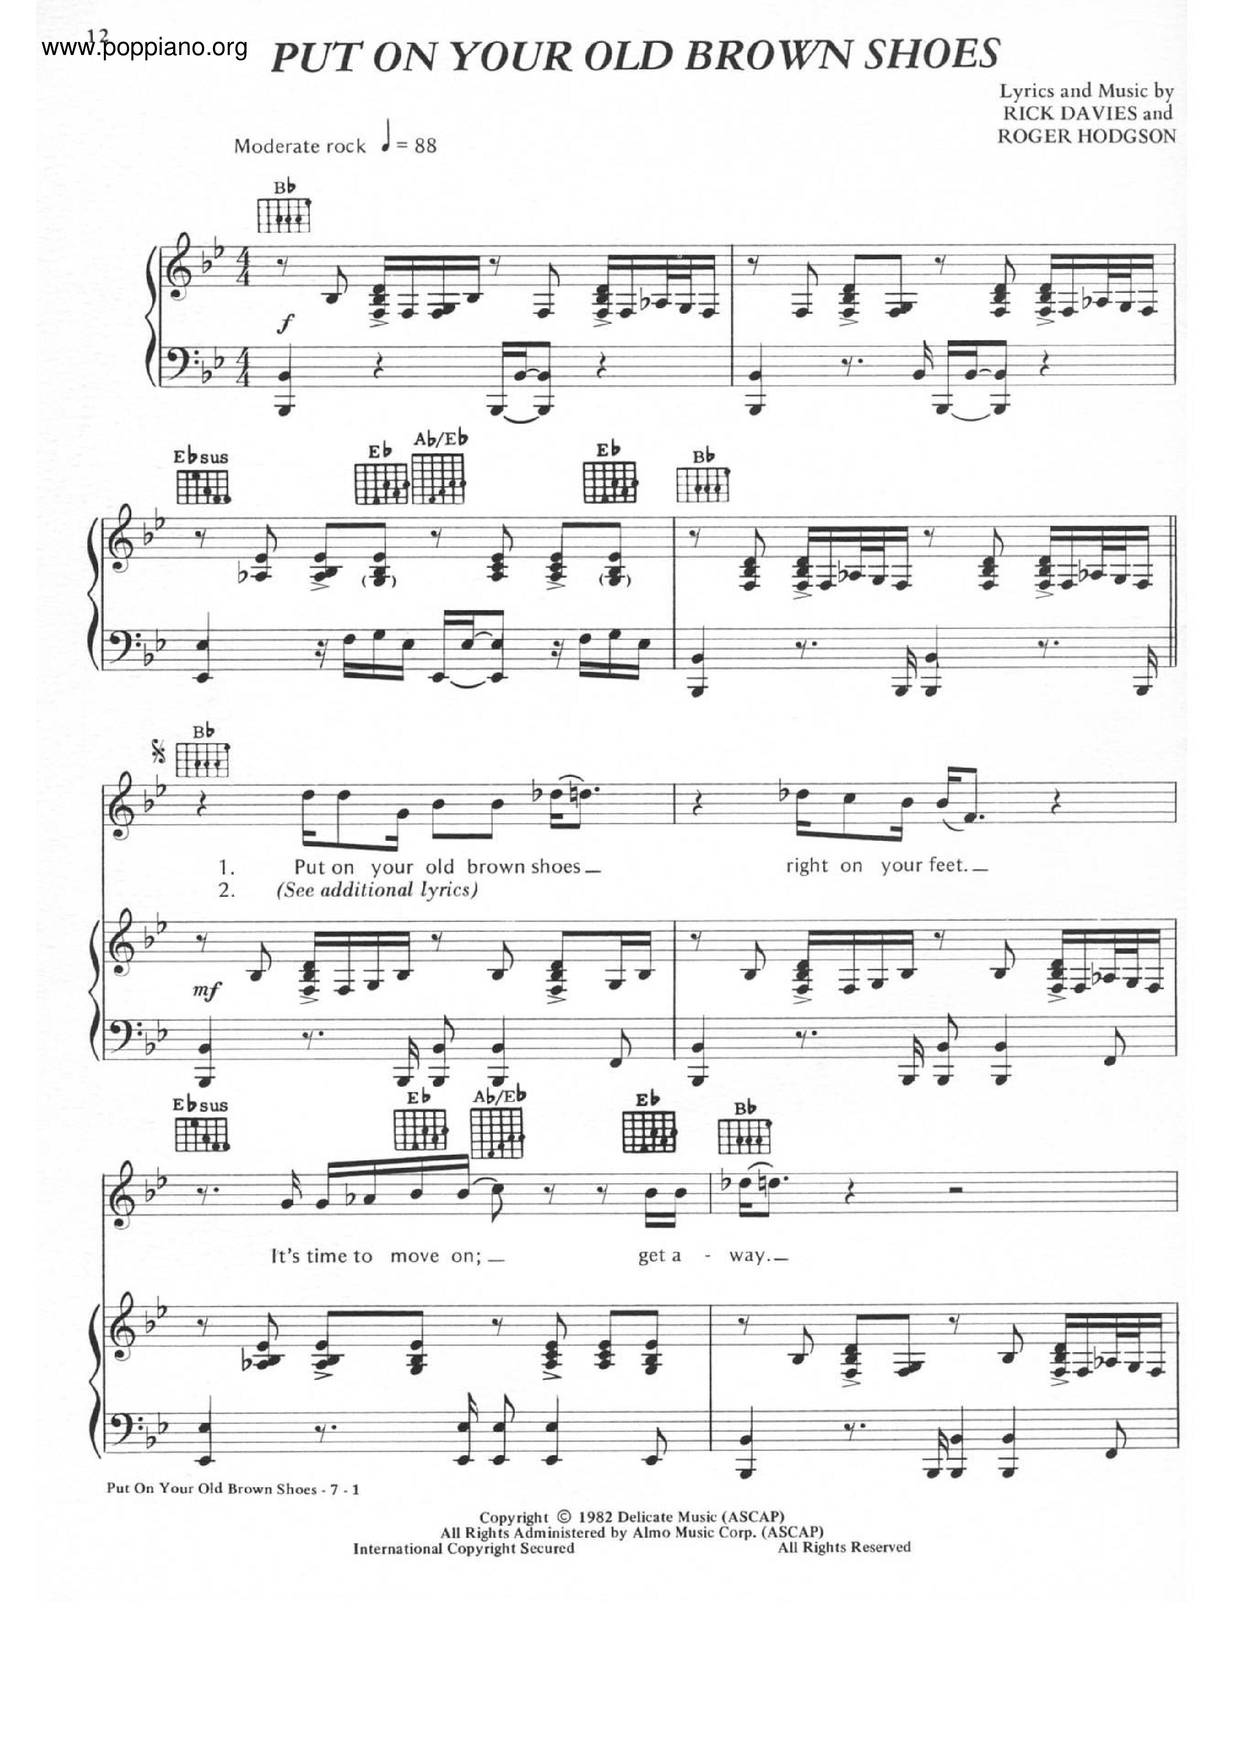 ☆ Supertramp-Put On Your Old Brown Shoes Sheet Music pdf, - Free Score  Download ☆